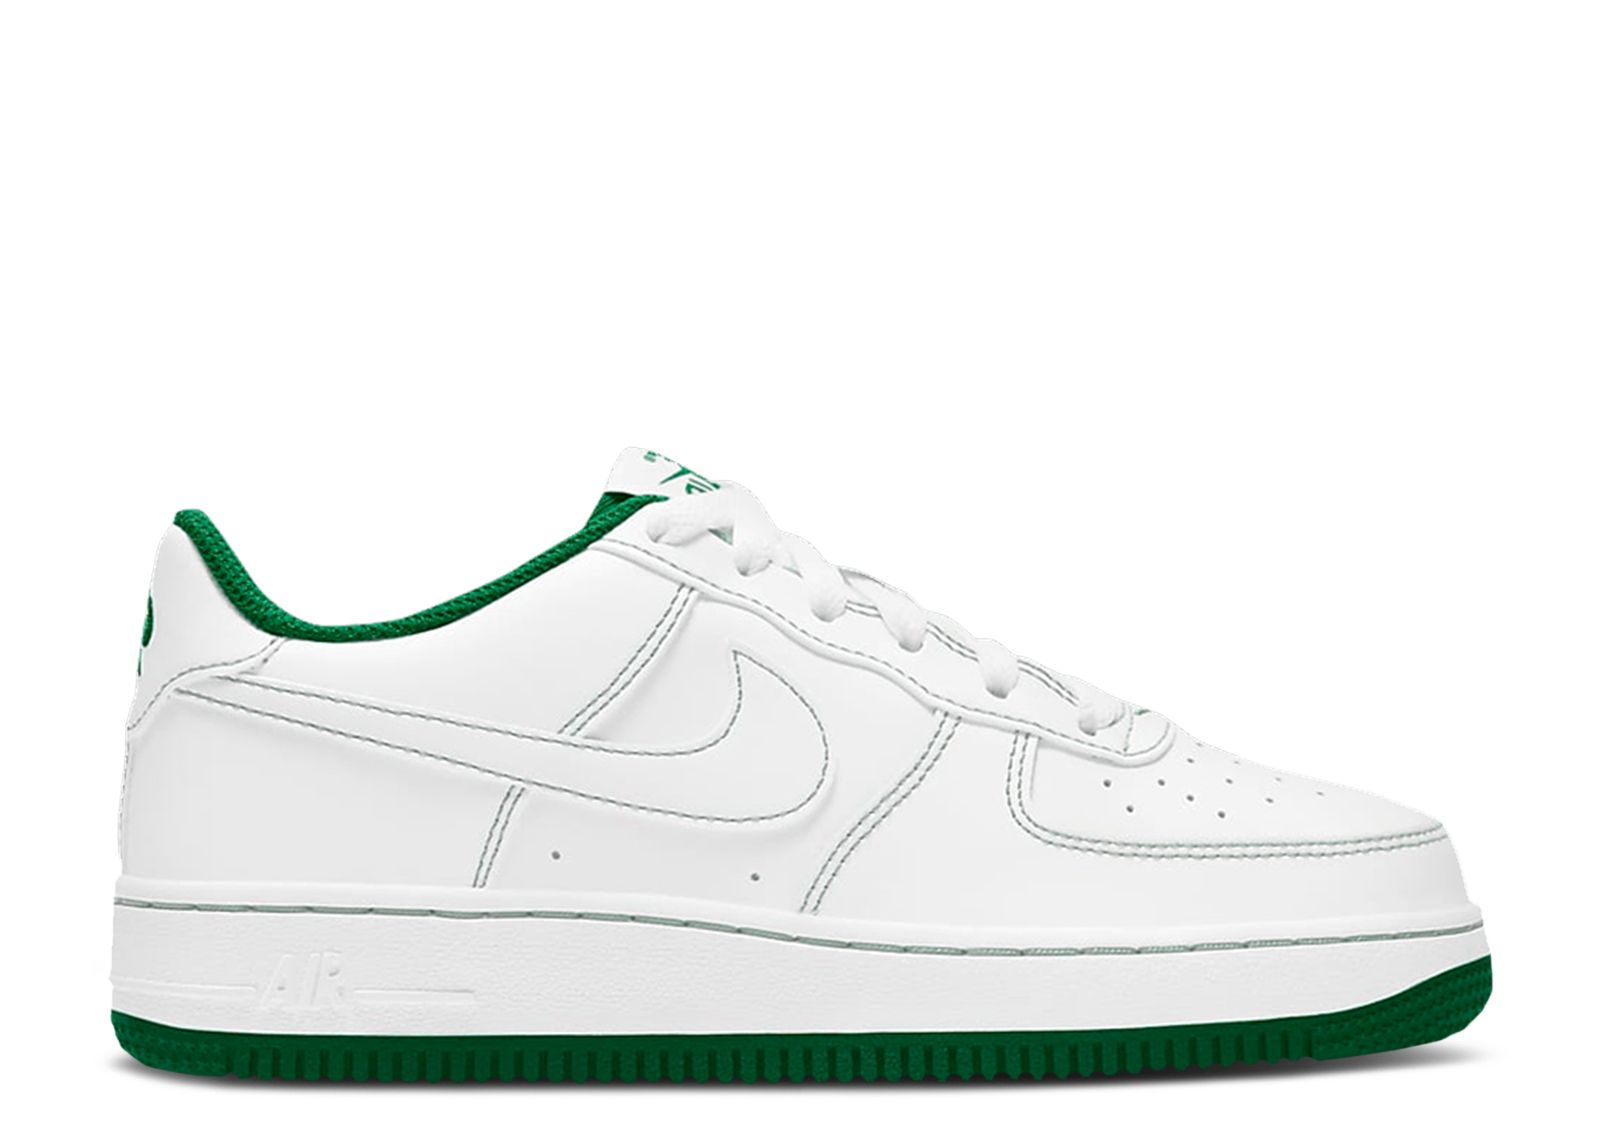 Second Chance - sail nike Air Force 1 Low White Pine Green (GS) - 37,5 | NEW